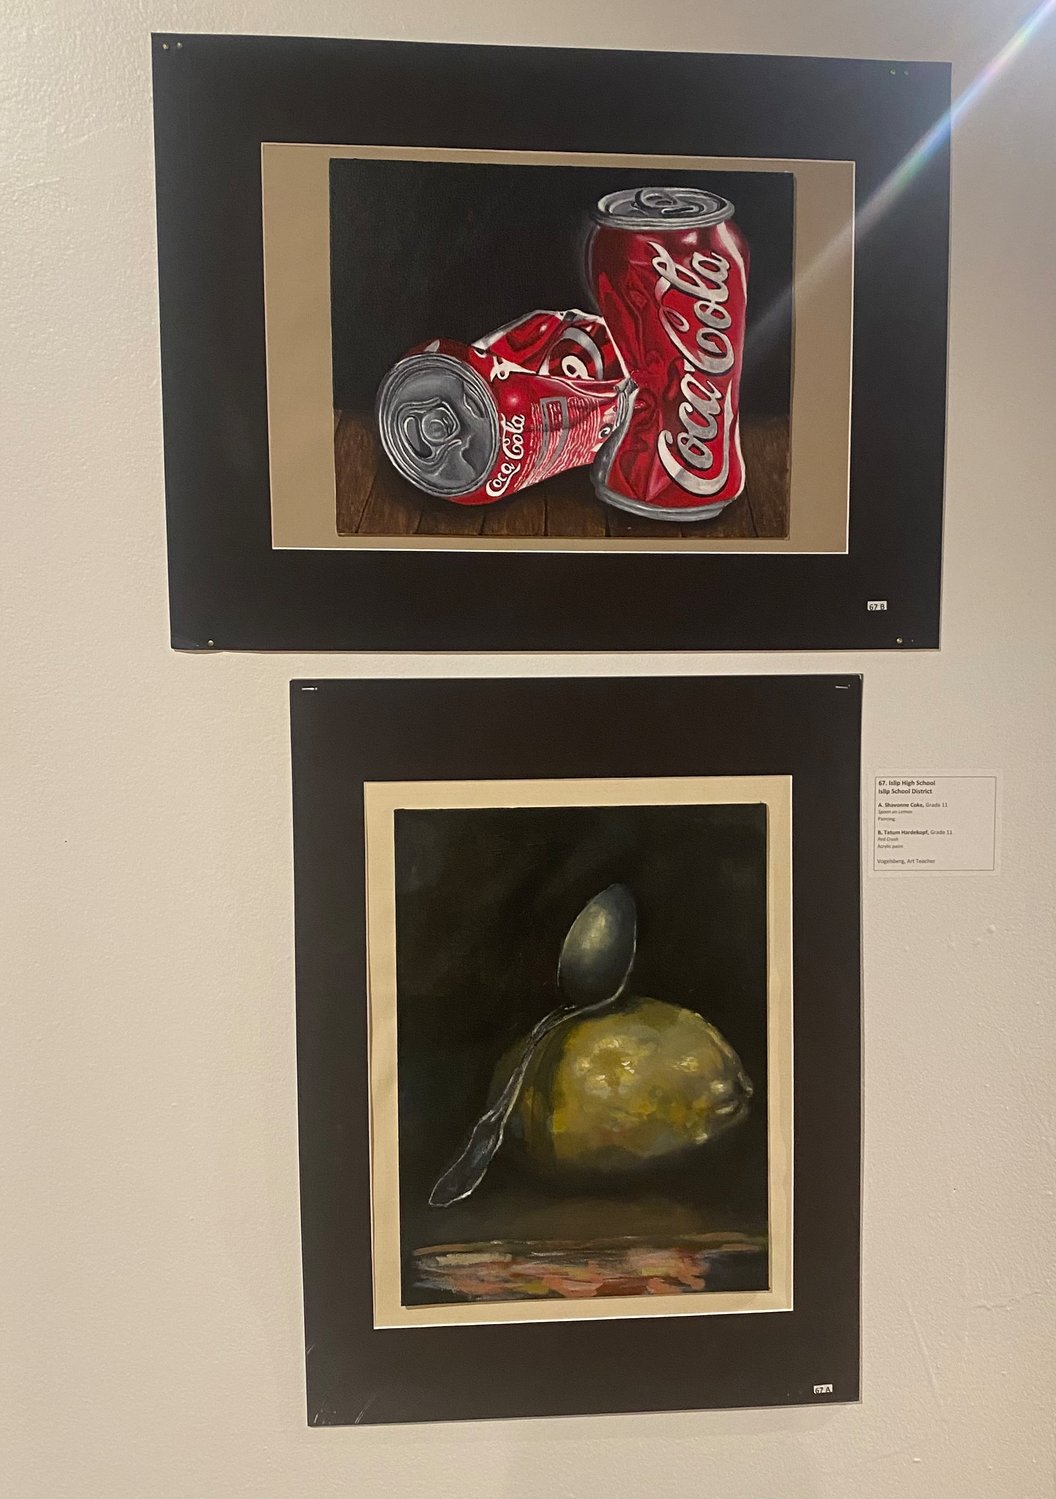 Student art on display in the museum’s “Colors of Long Island” exhibit, which featured artwork done by Islip High School students.